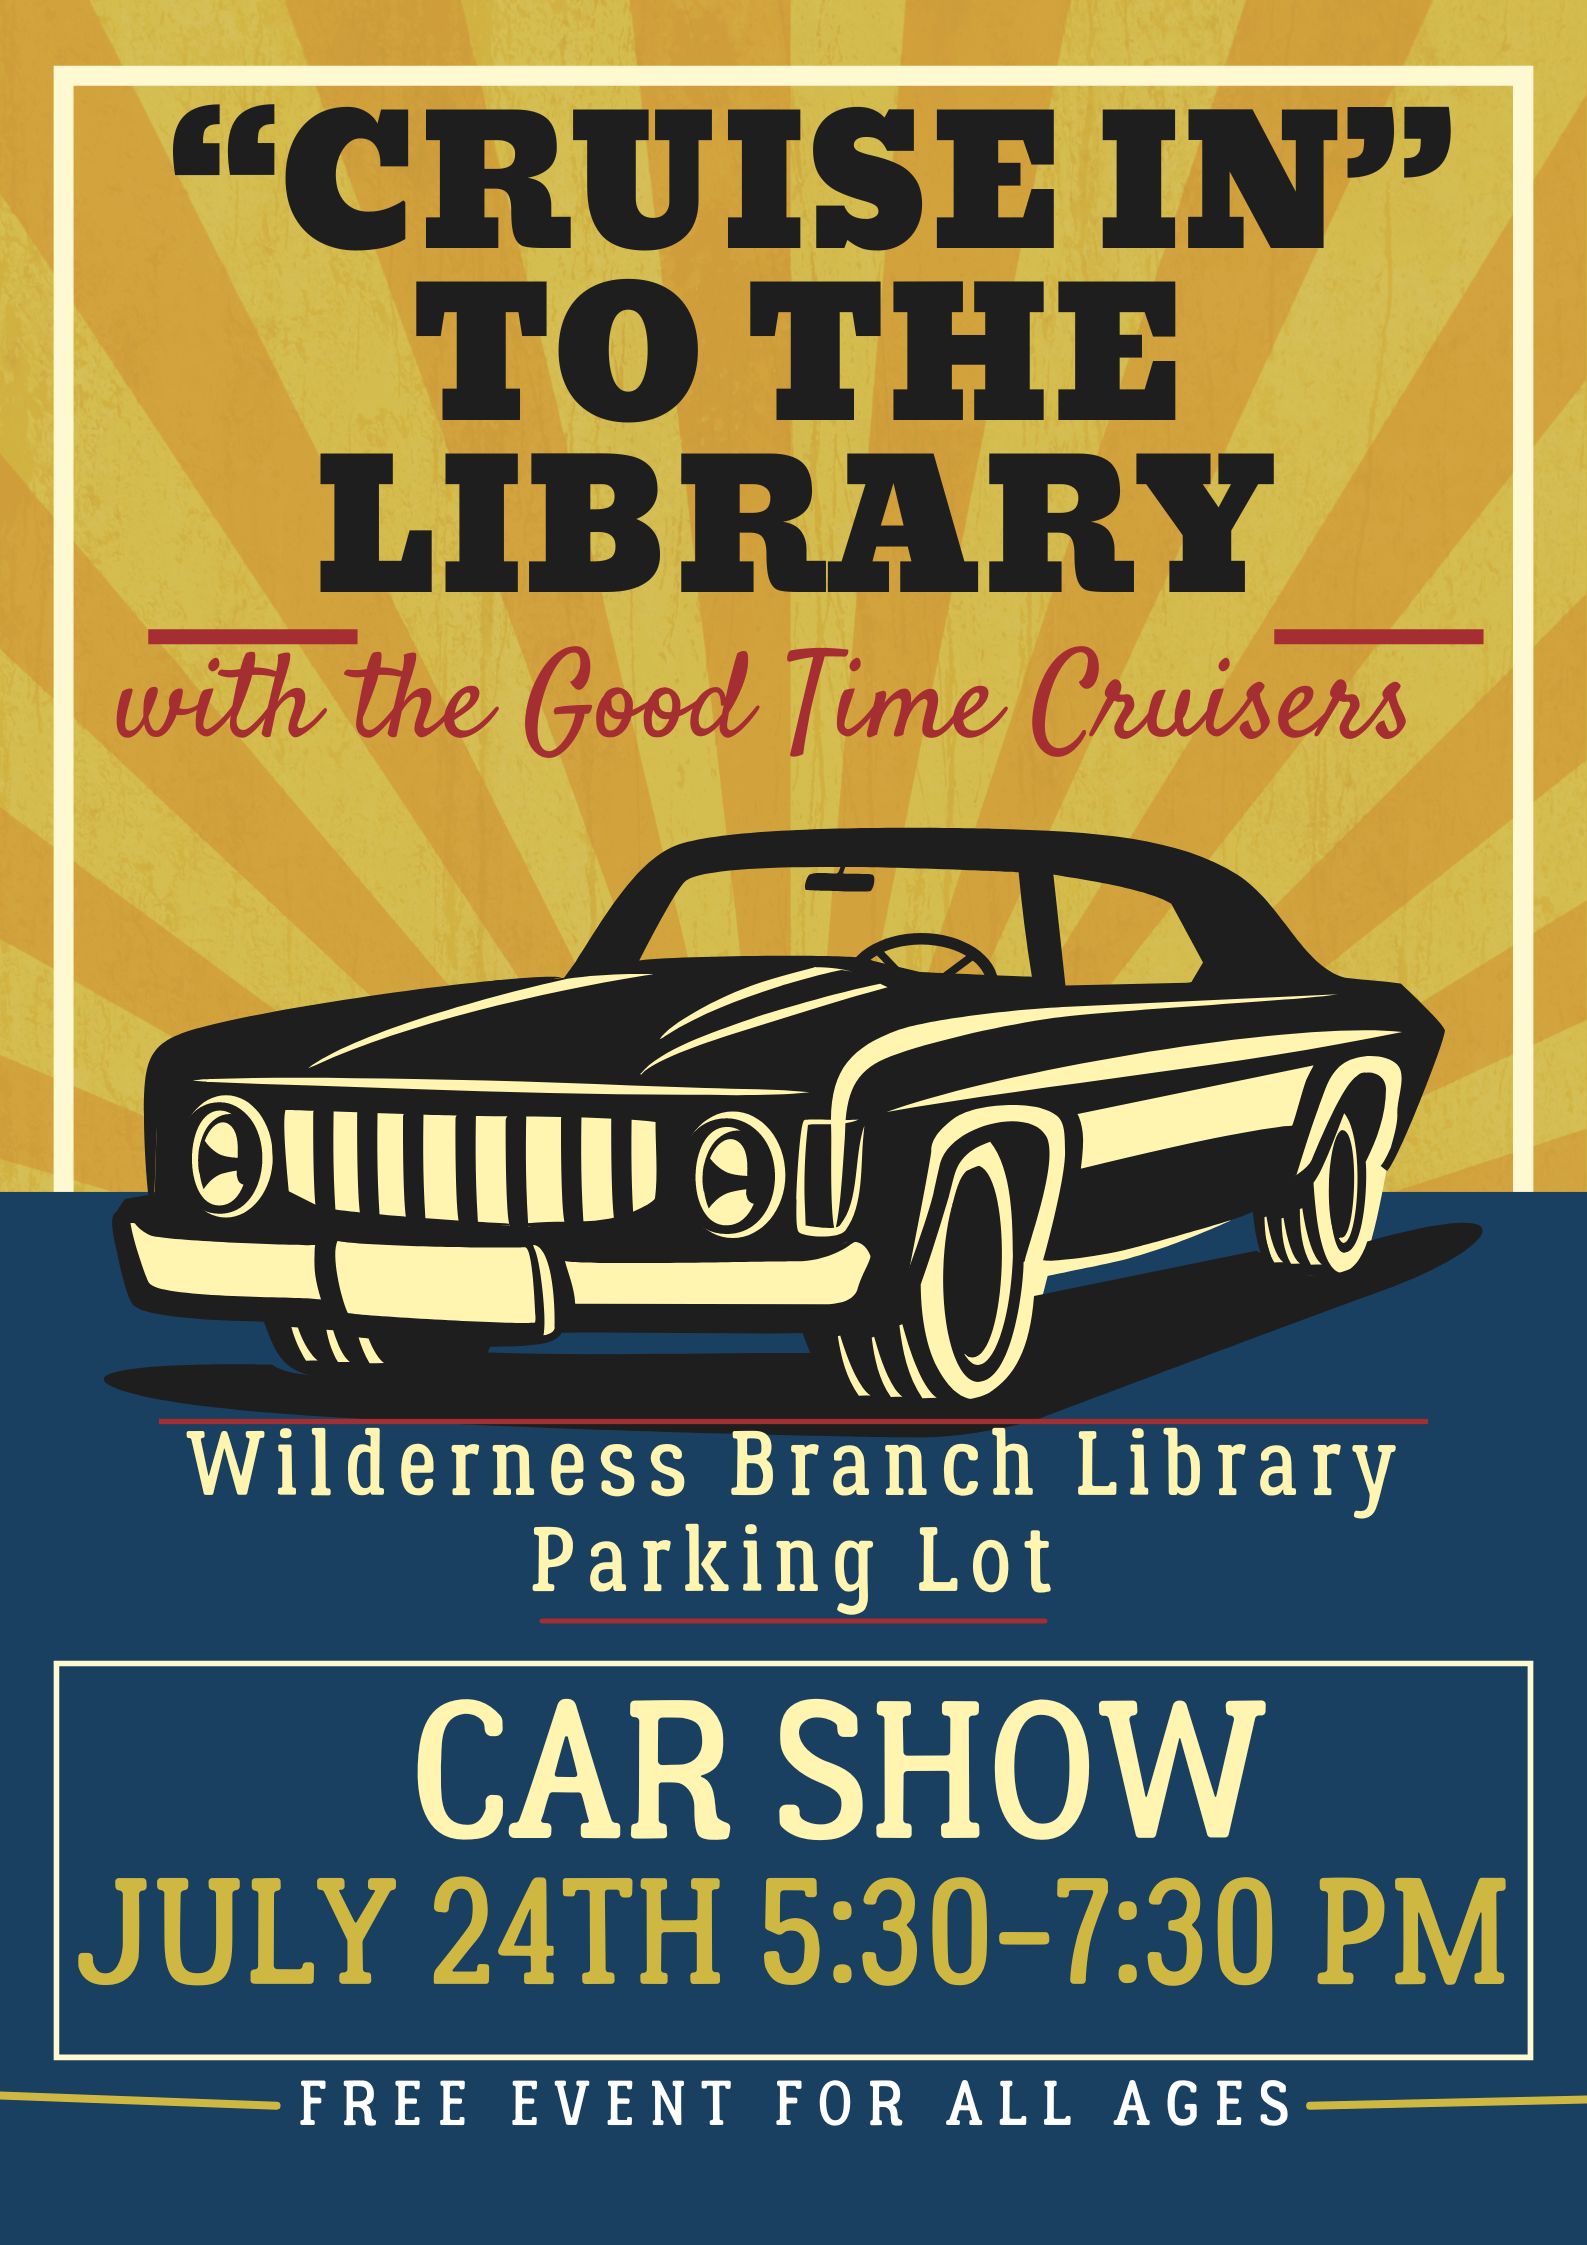 Car Show in the Wilderness Branch Library Parking Lot on July 24th from 5:30-7:30 pm